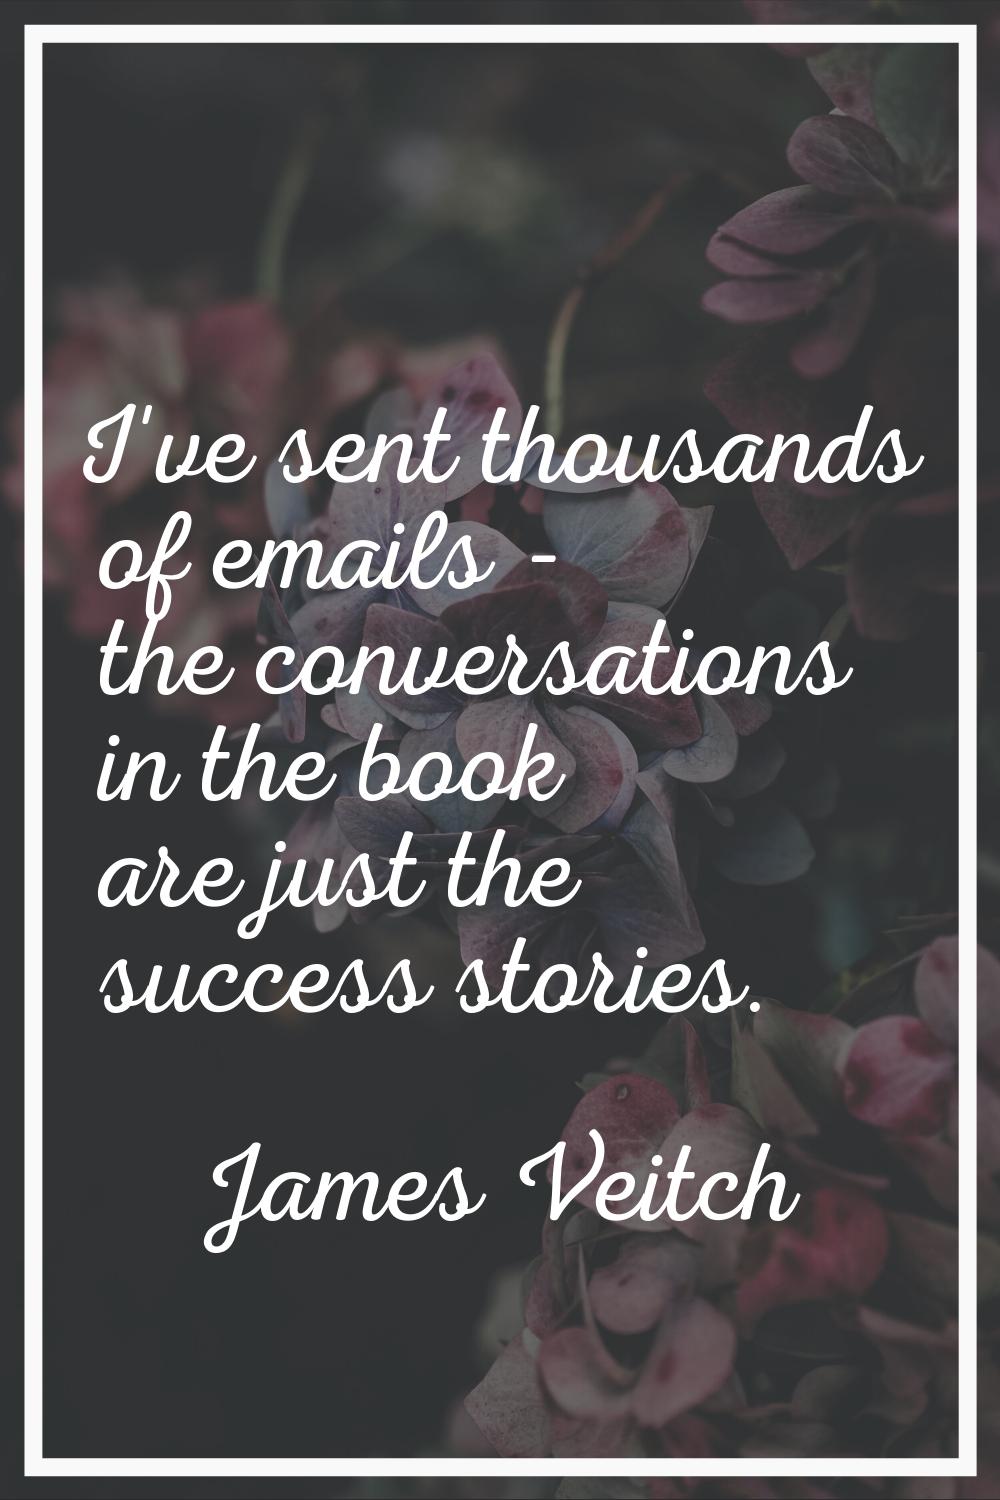 I've sent thousands of emails - the conversations in the book are just the success stories.